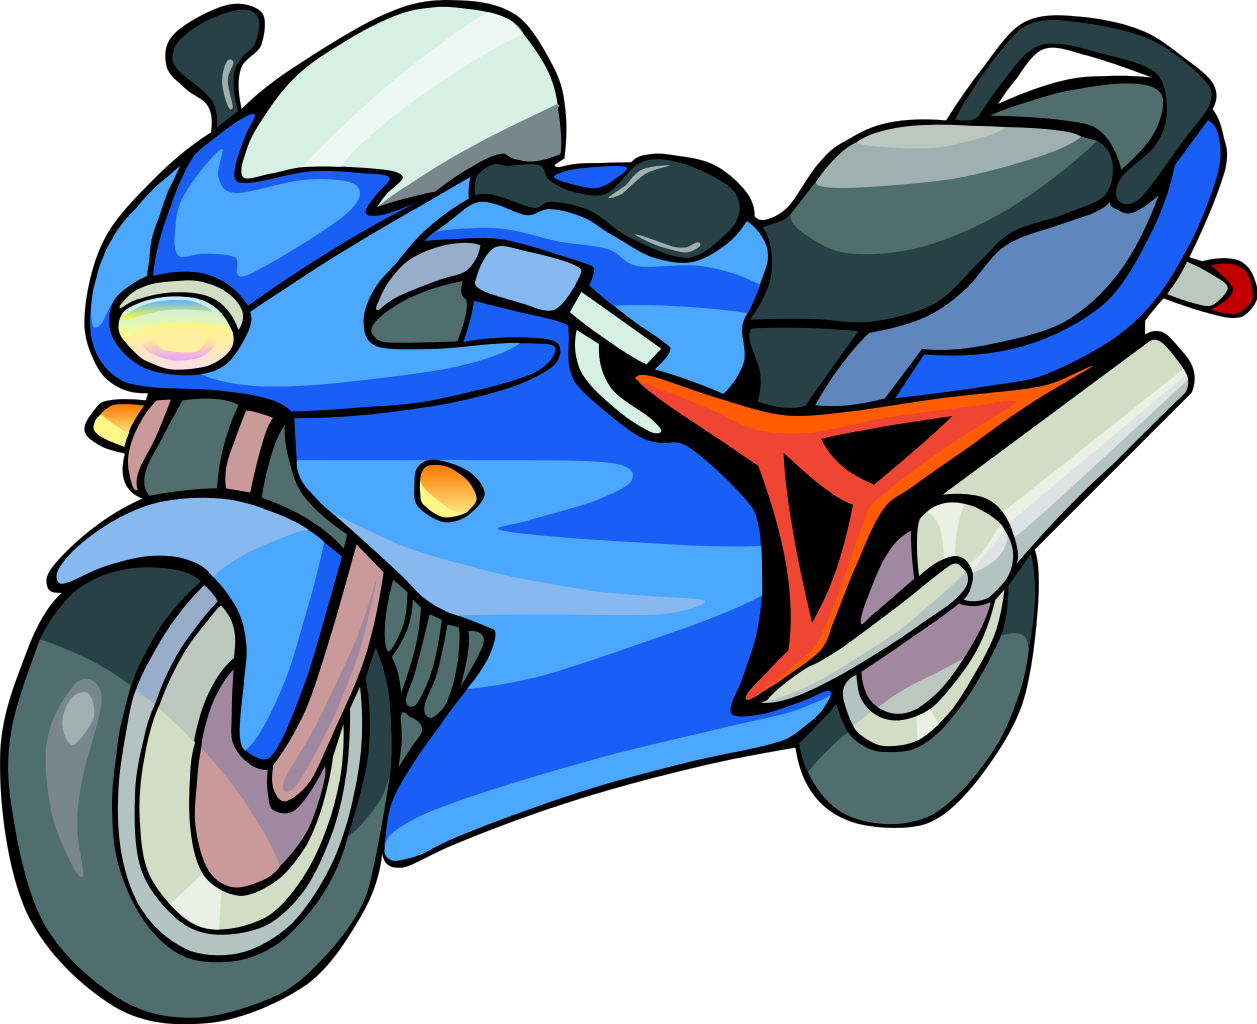 File wikipedia fileclipart motorcyclesvg. Motorcycle clipart svg